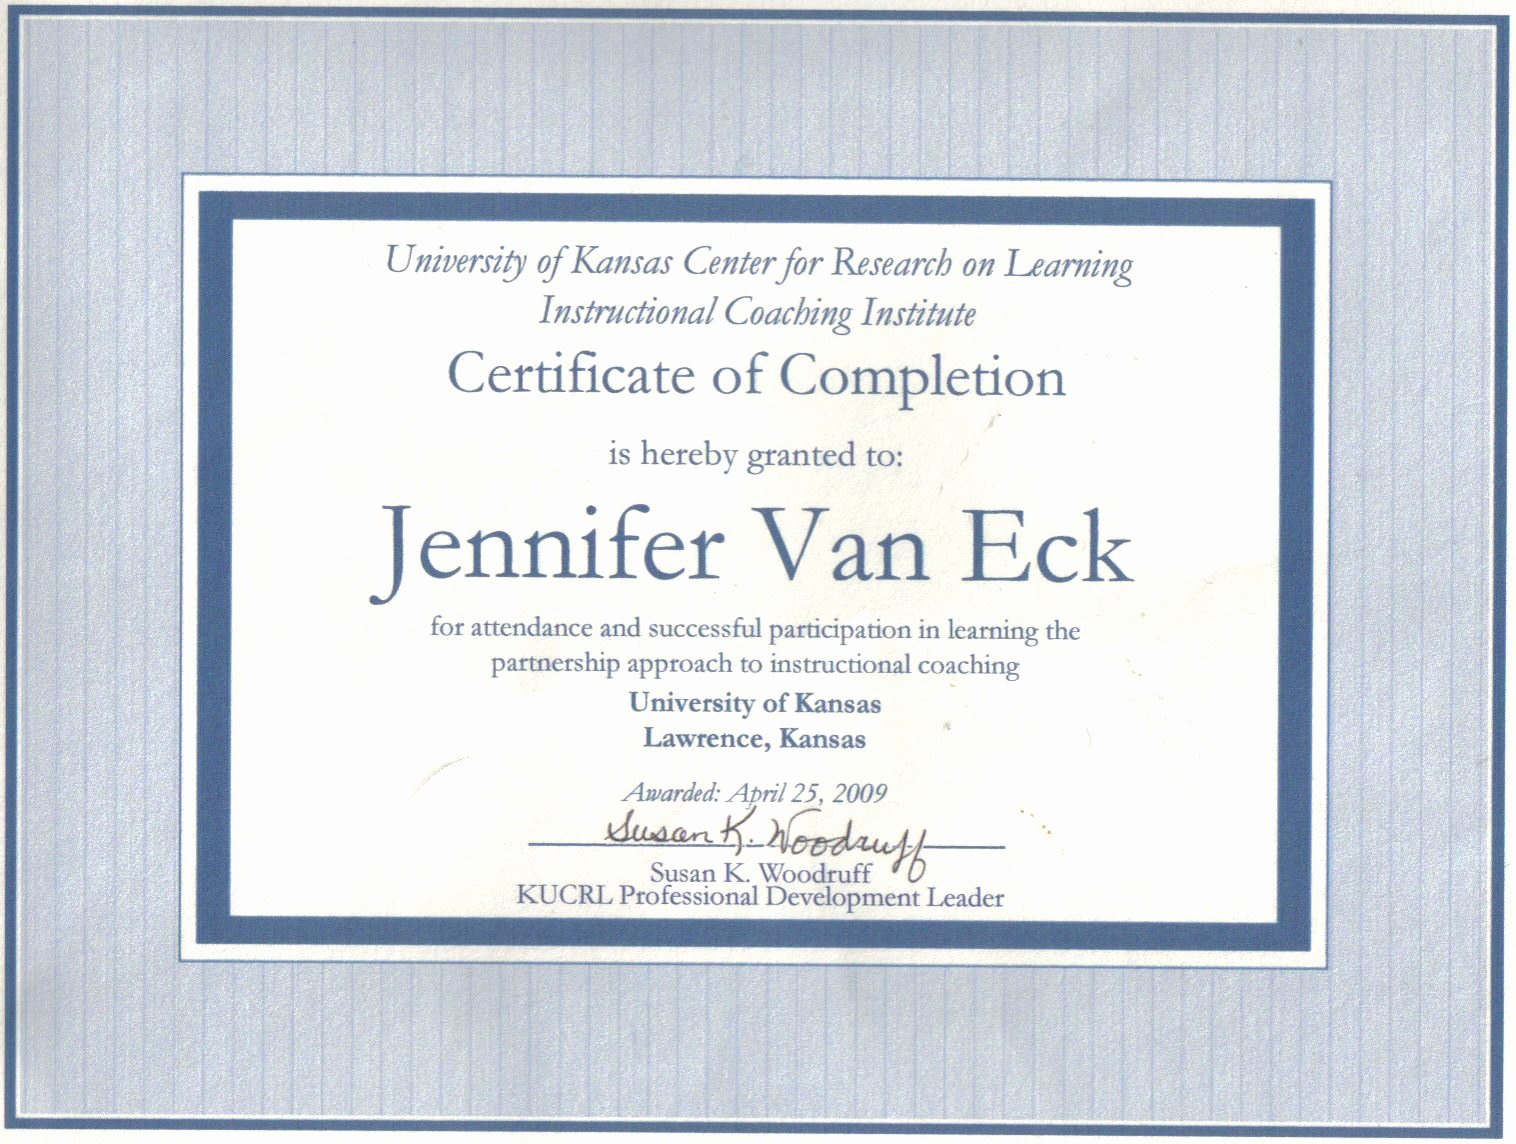 Certificate Of Completion Wording Lovely Artifact 2 Instructional Coaching Certificate Of